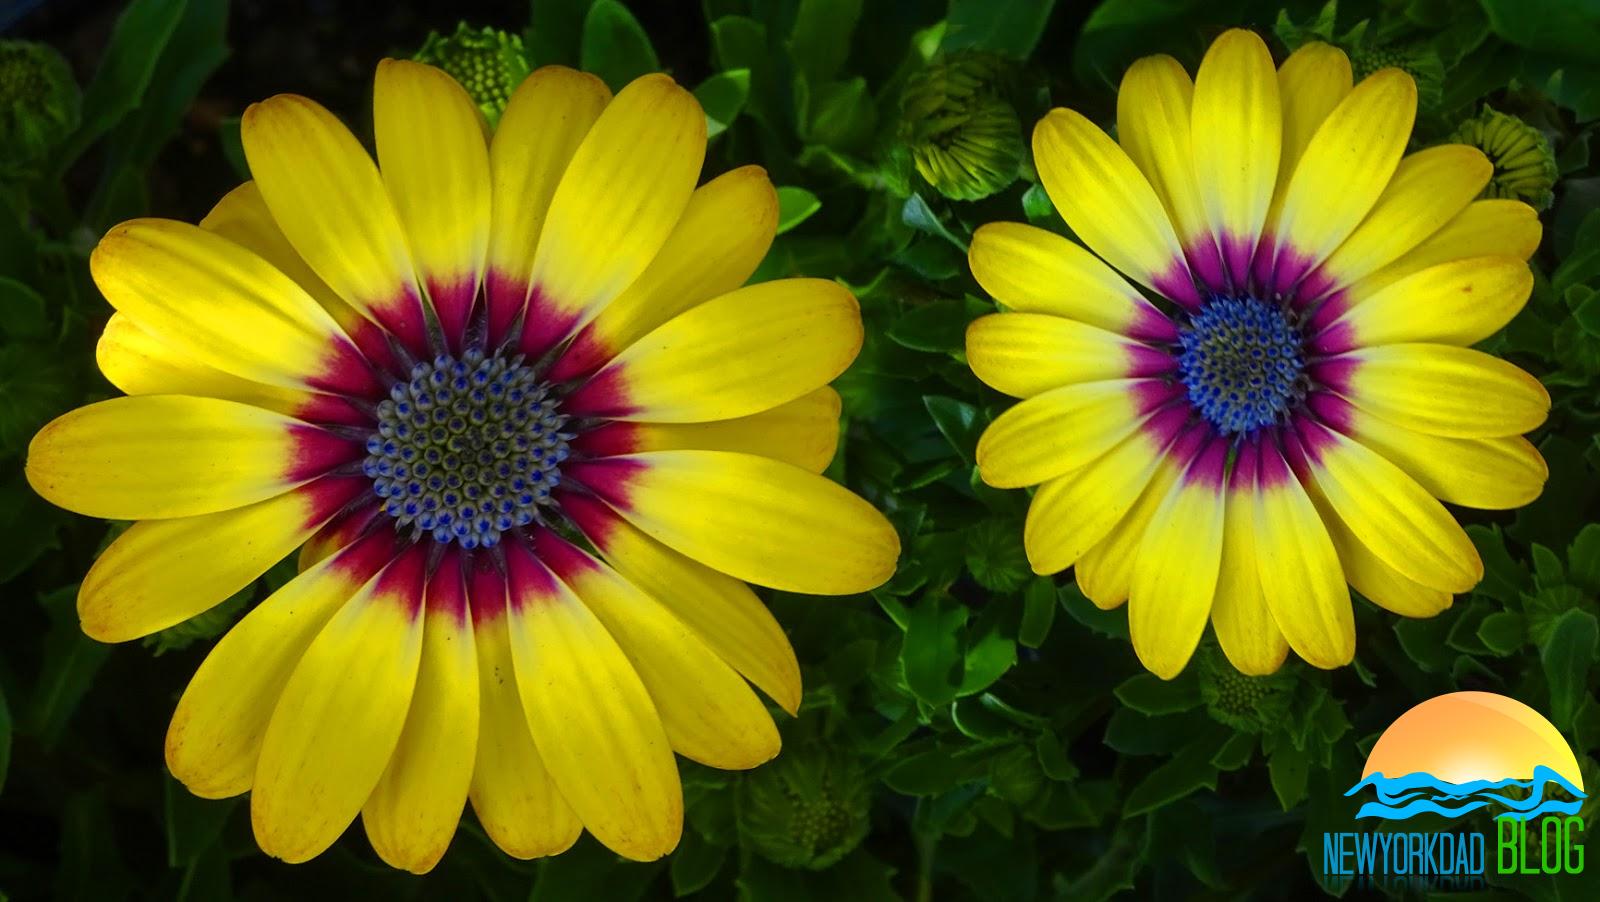 How to Care For African Daisy Plants